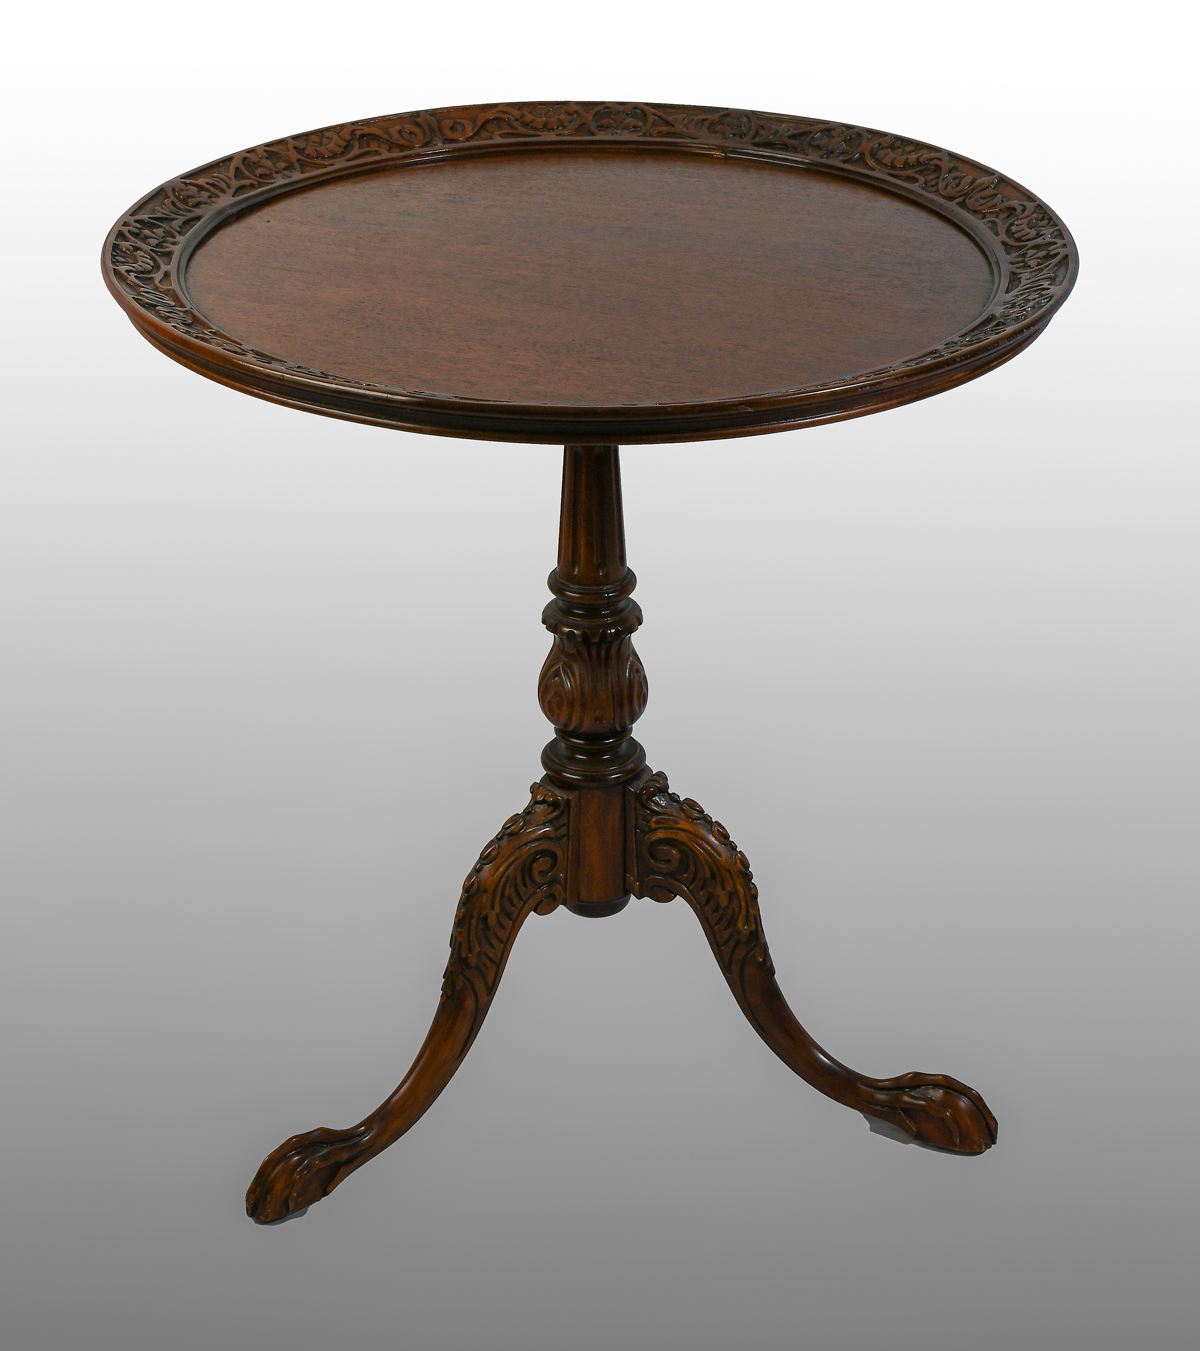 CARVED CHIPPENDALE STYLE TEA TABLE: